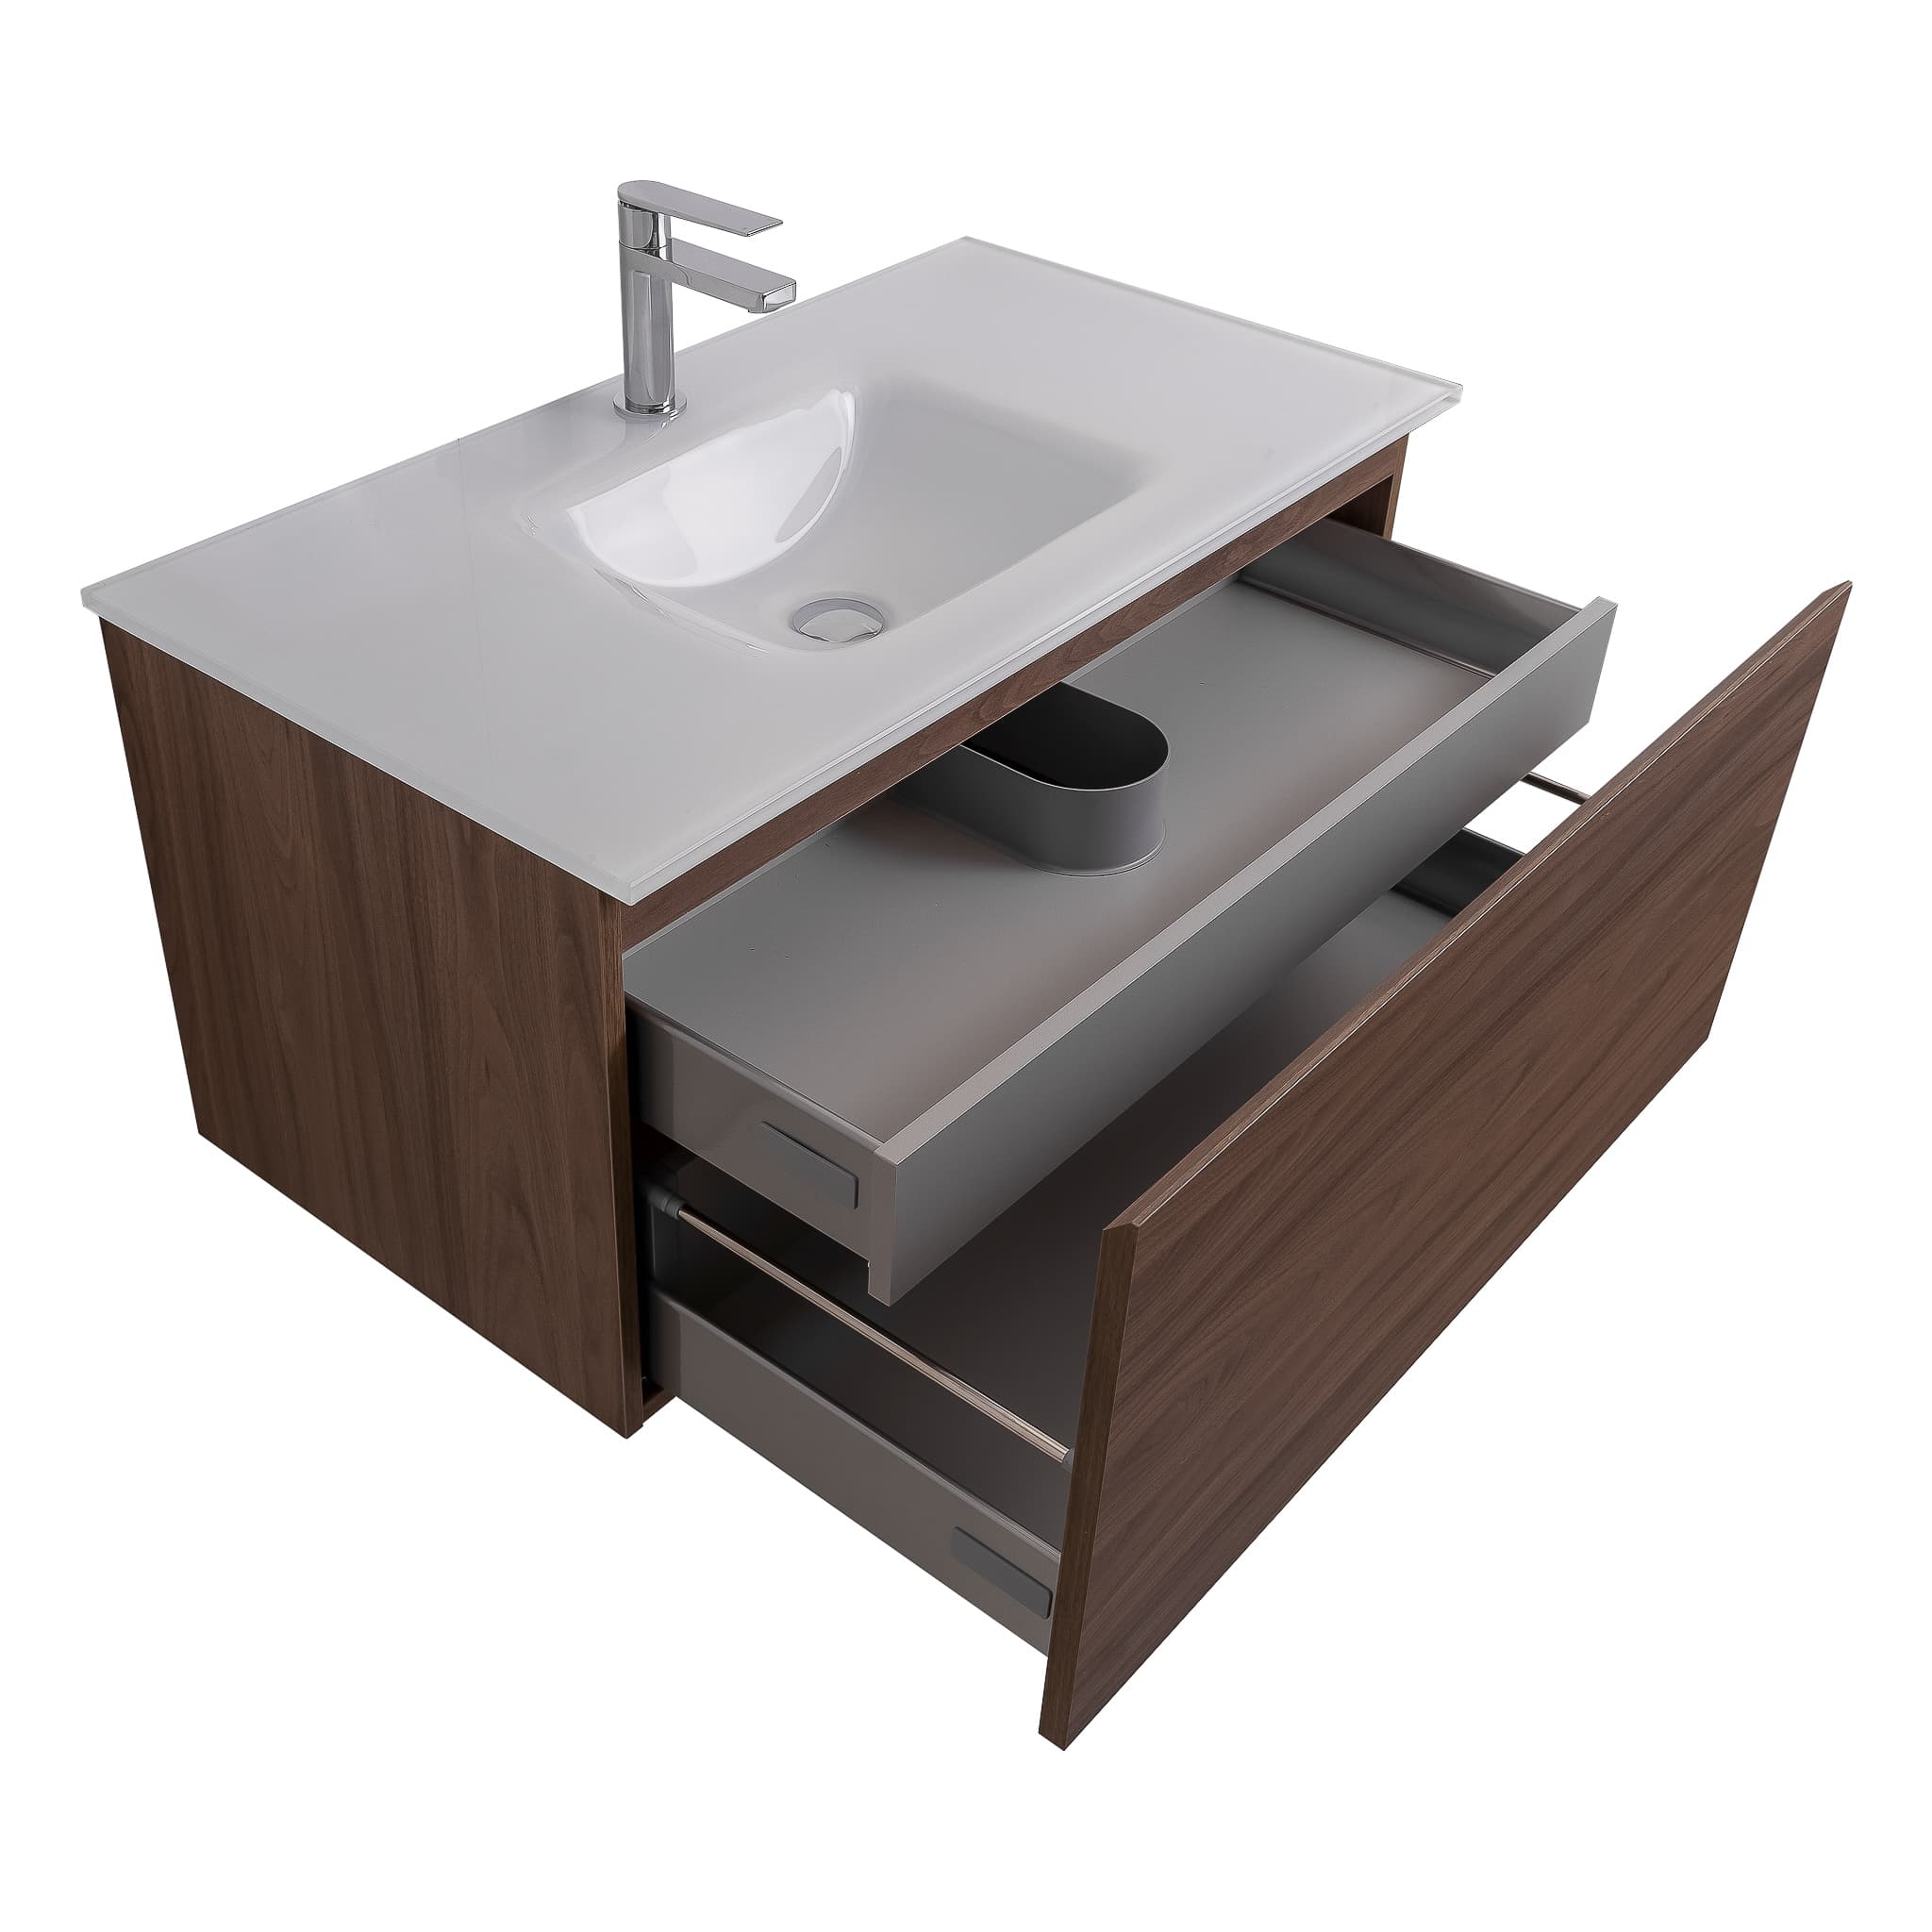 Venice 31.5 Walnut Wood Texture Cabinet, White Tempered Glass Sink, Wall Mounted Modern Vanity Set